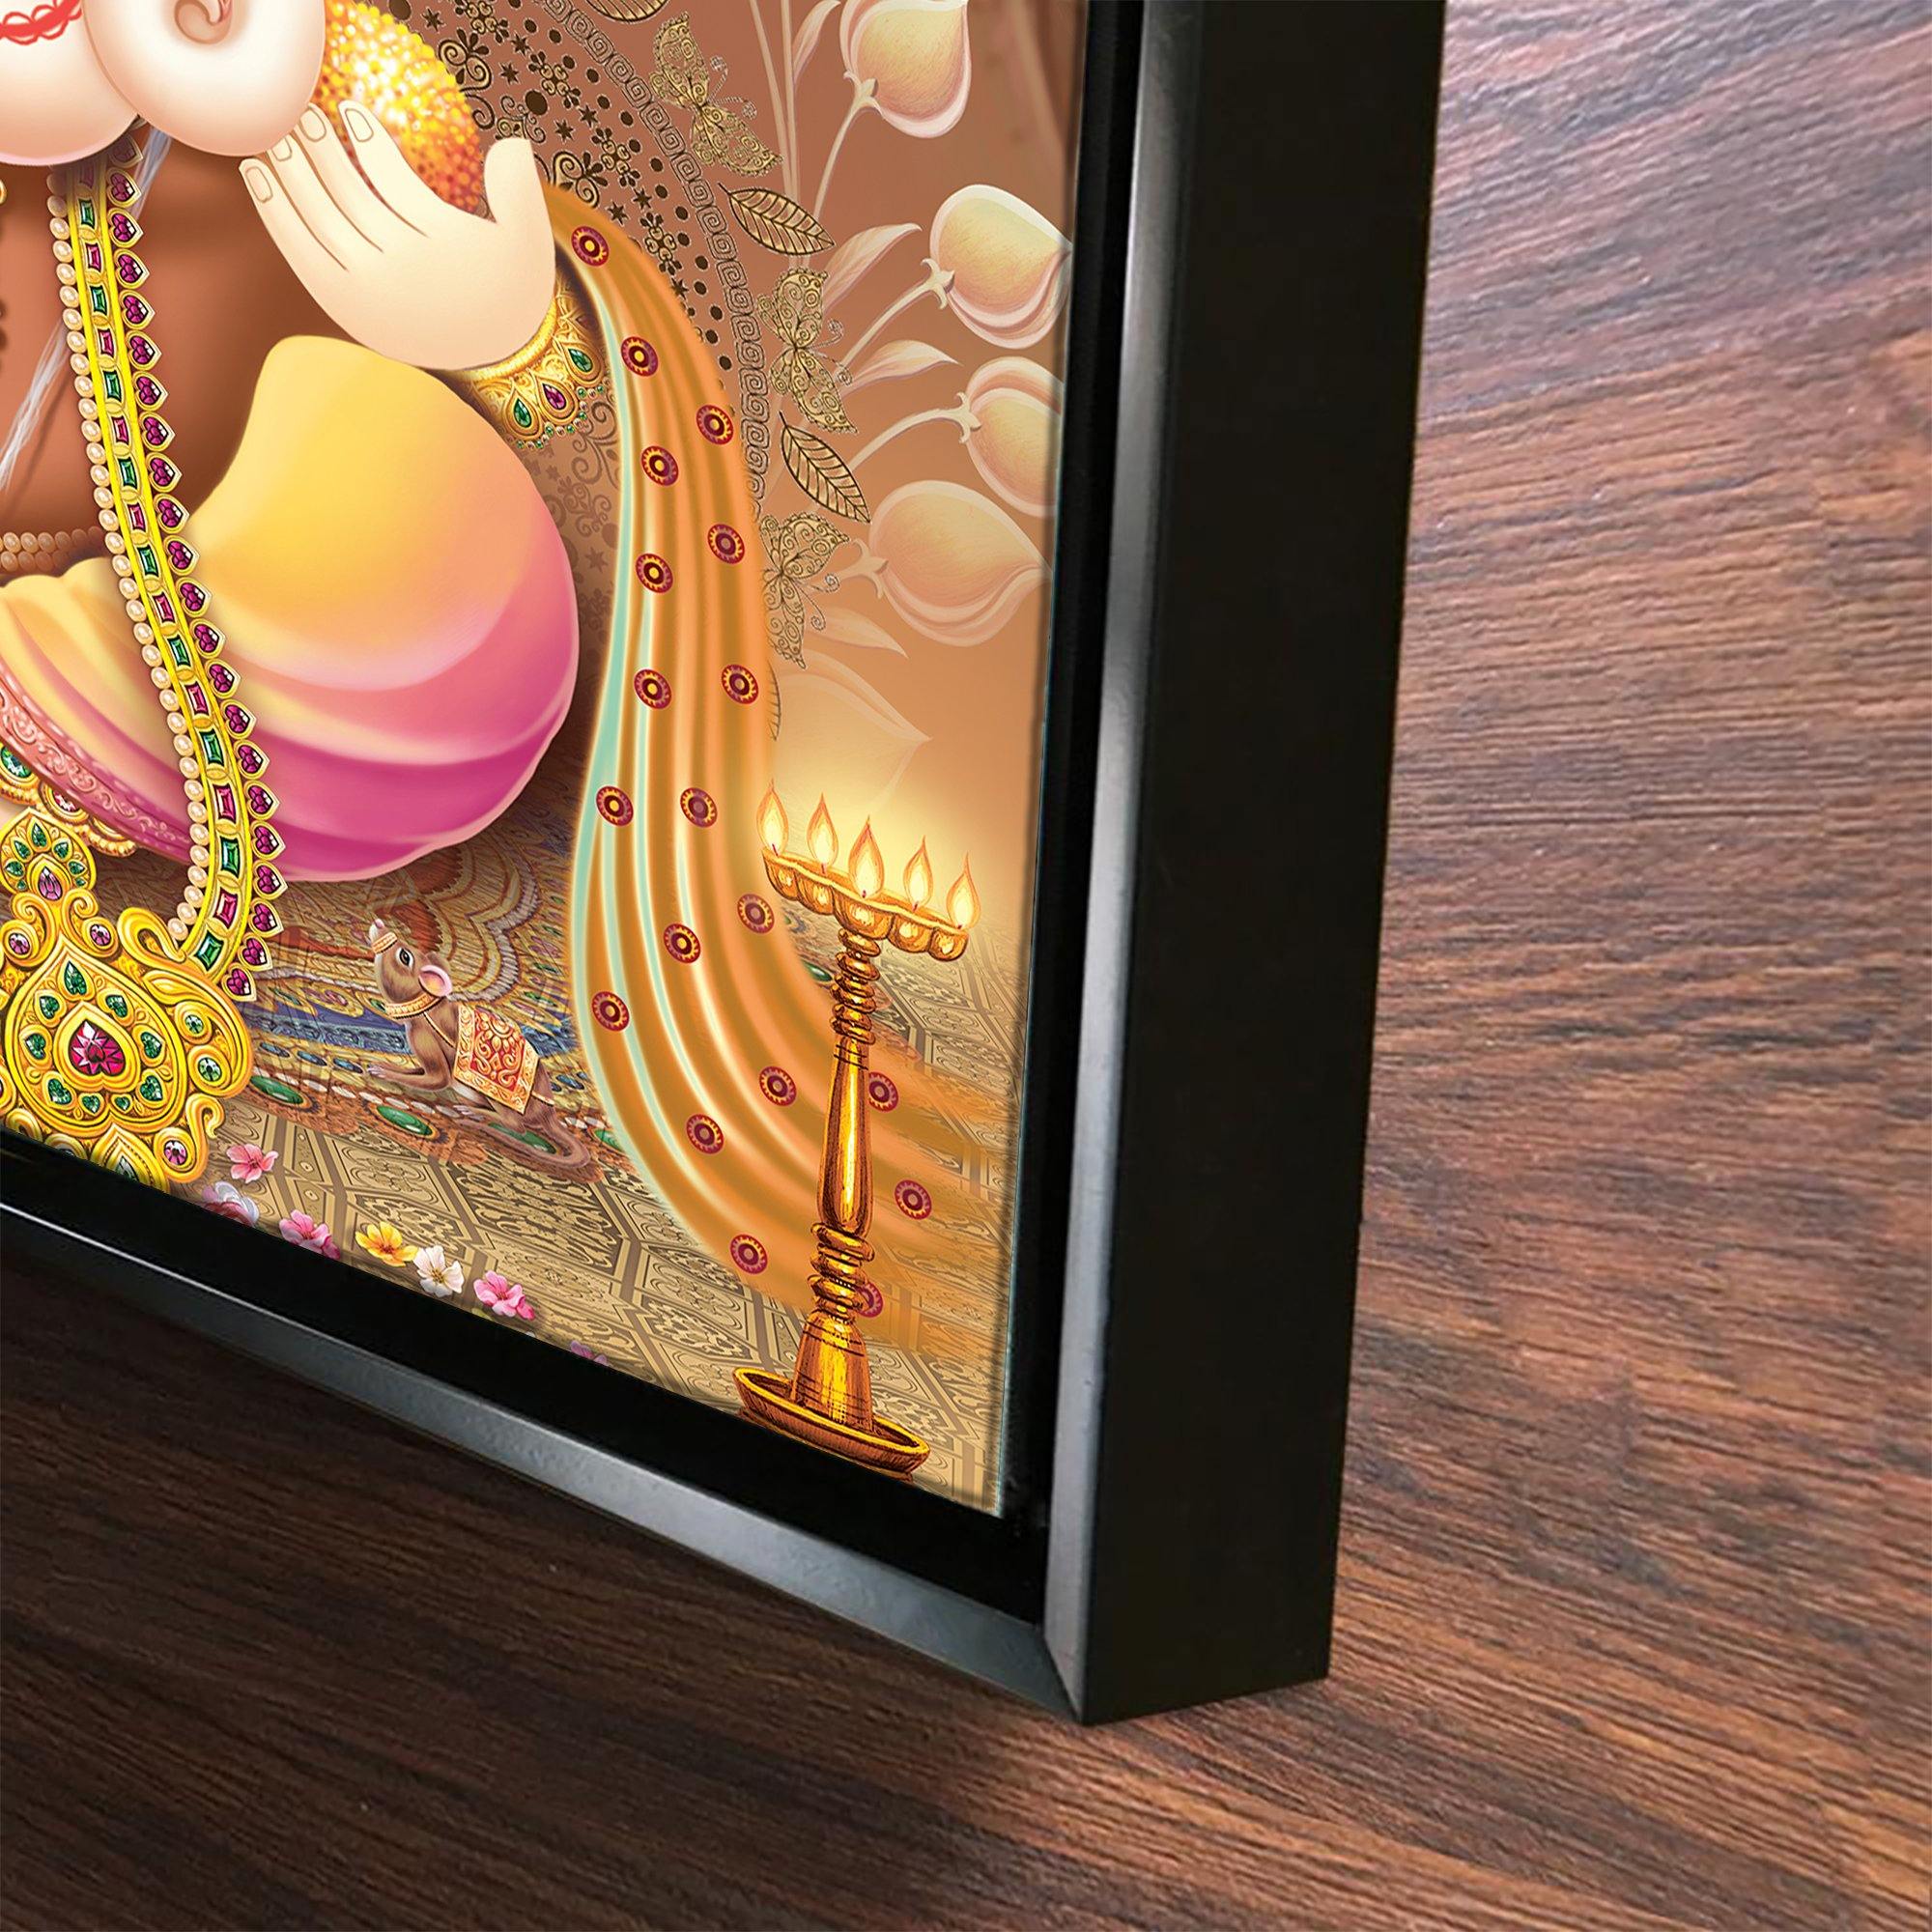 Lord Ganesha Floating Canvas Wall Painting Frame